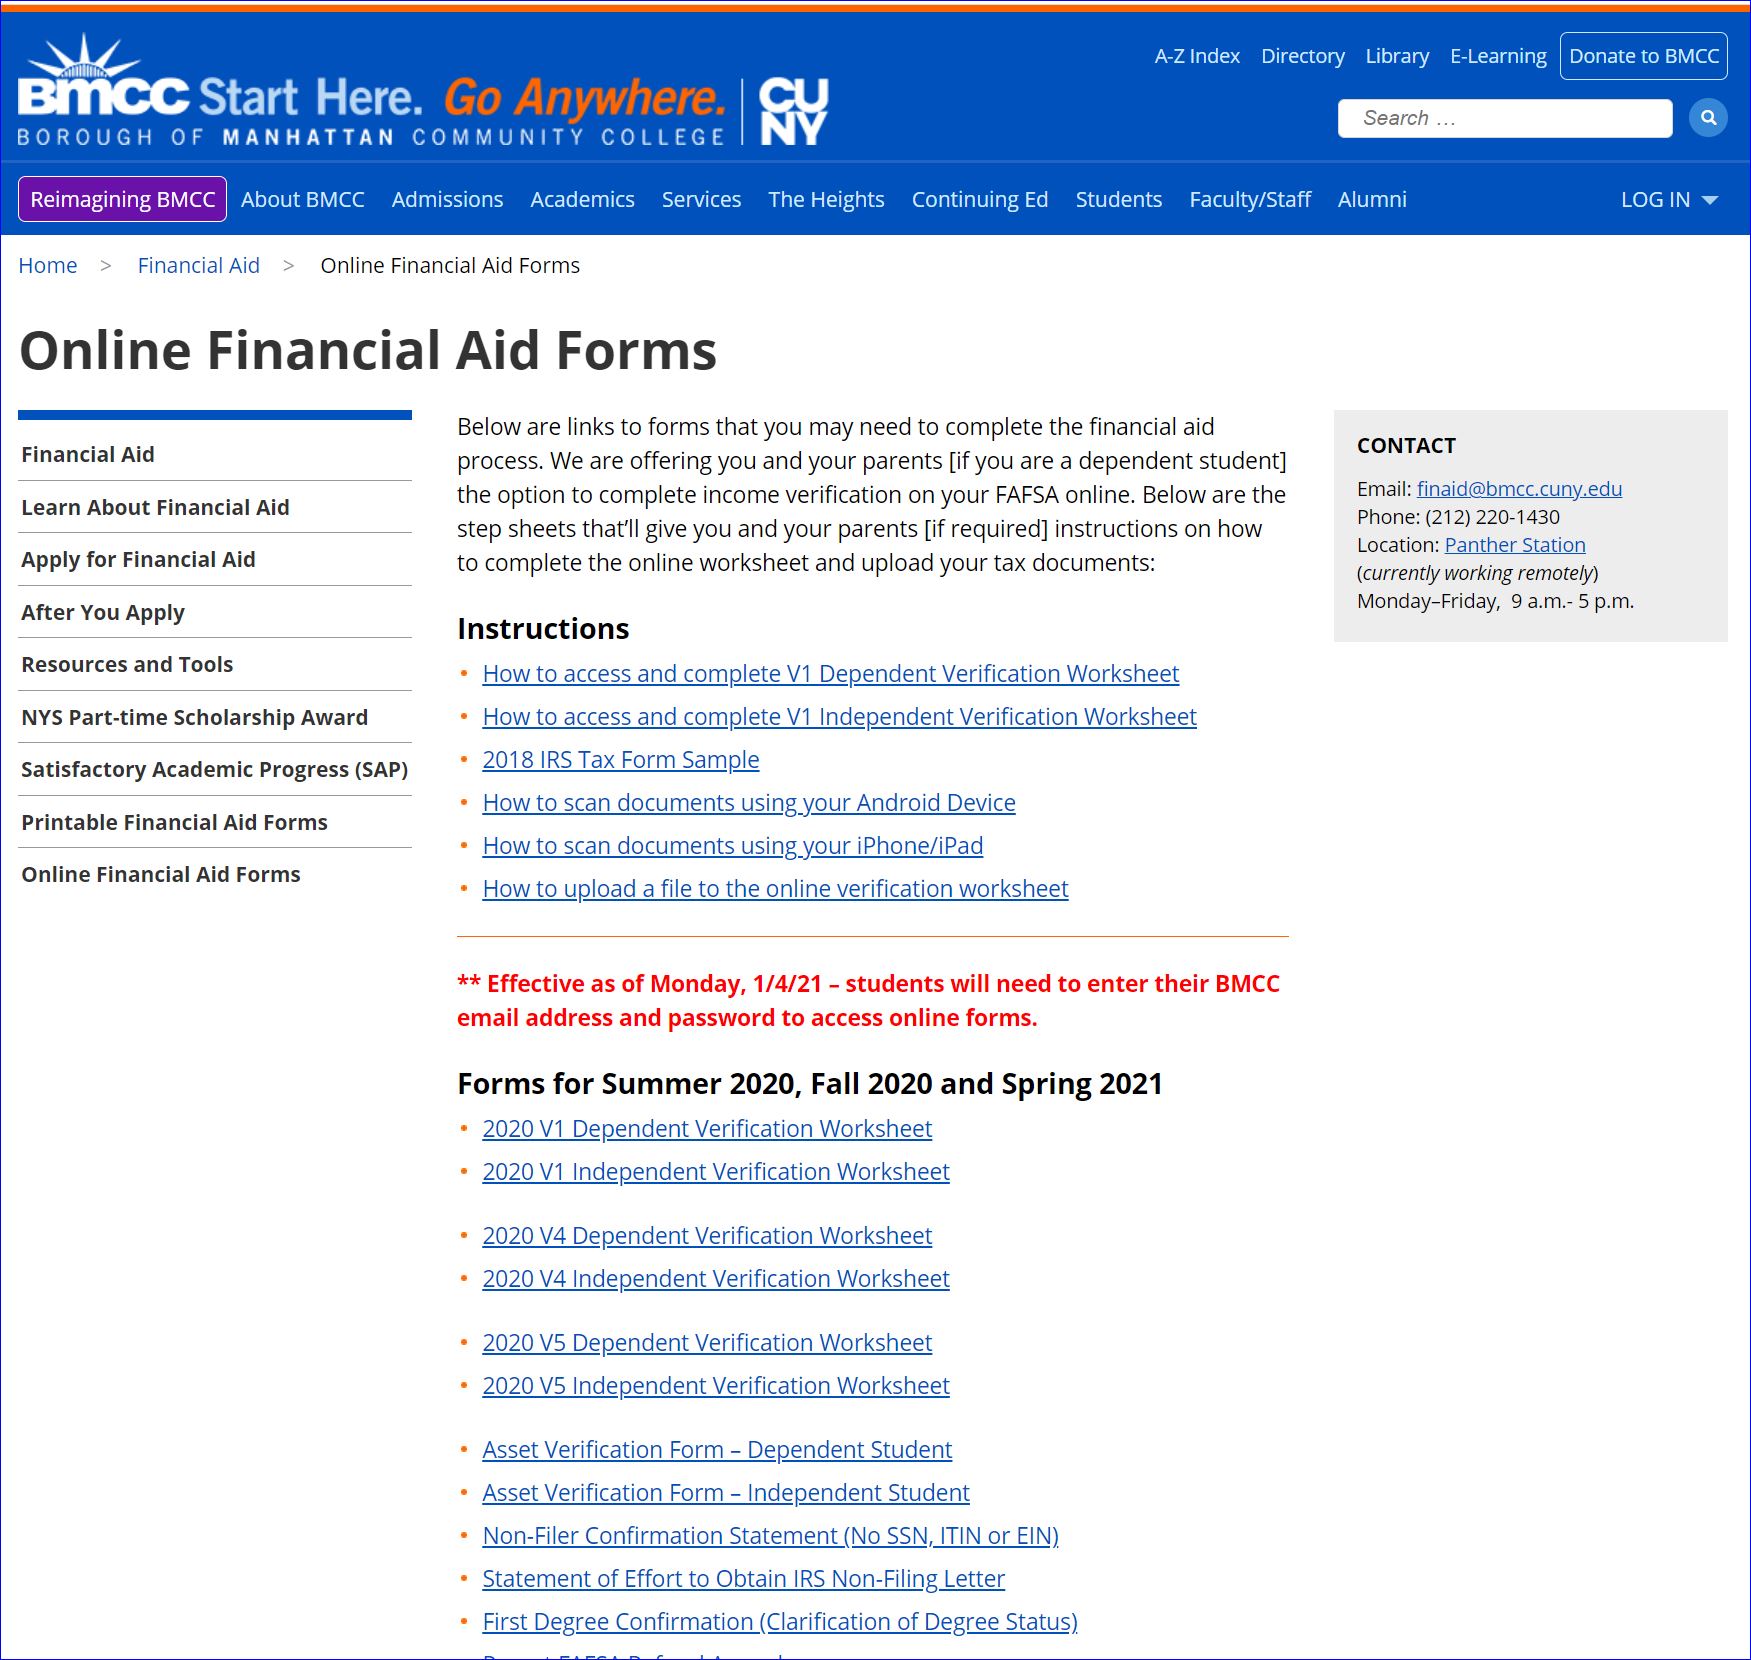 Online Financial Aid Forms